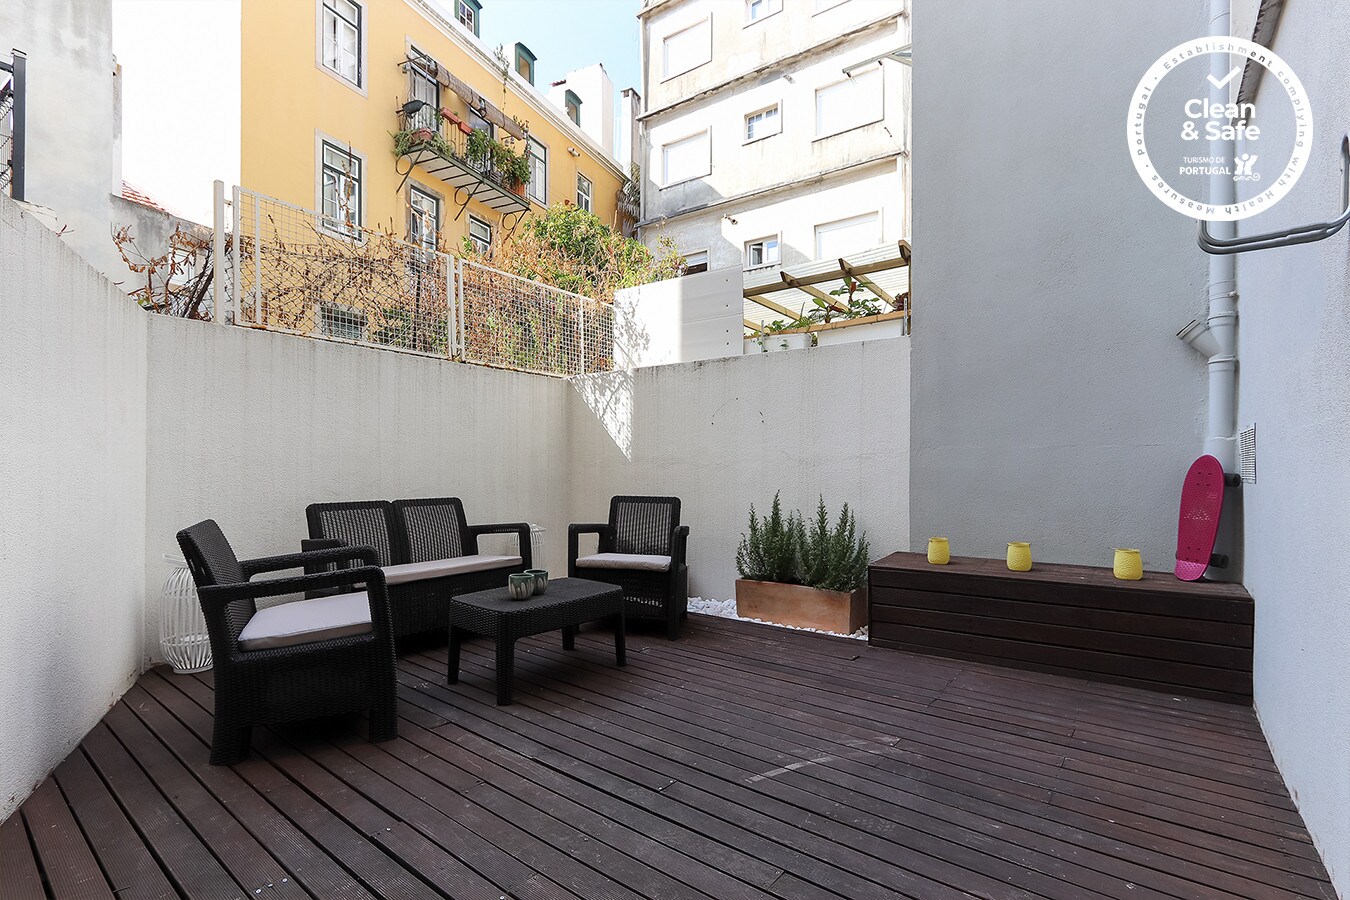 Property Image 1 - Principe Real Stunning Apartment with Terrace